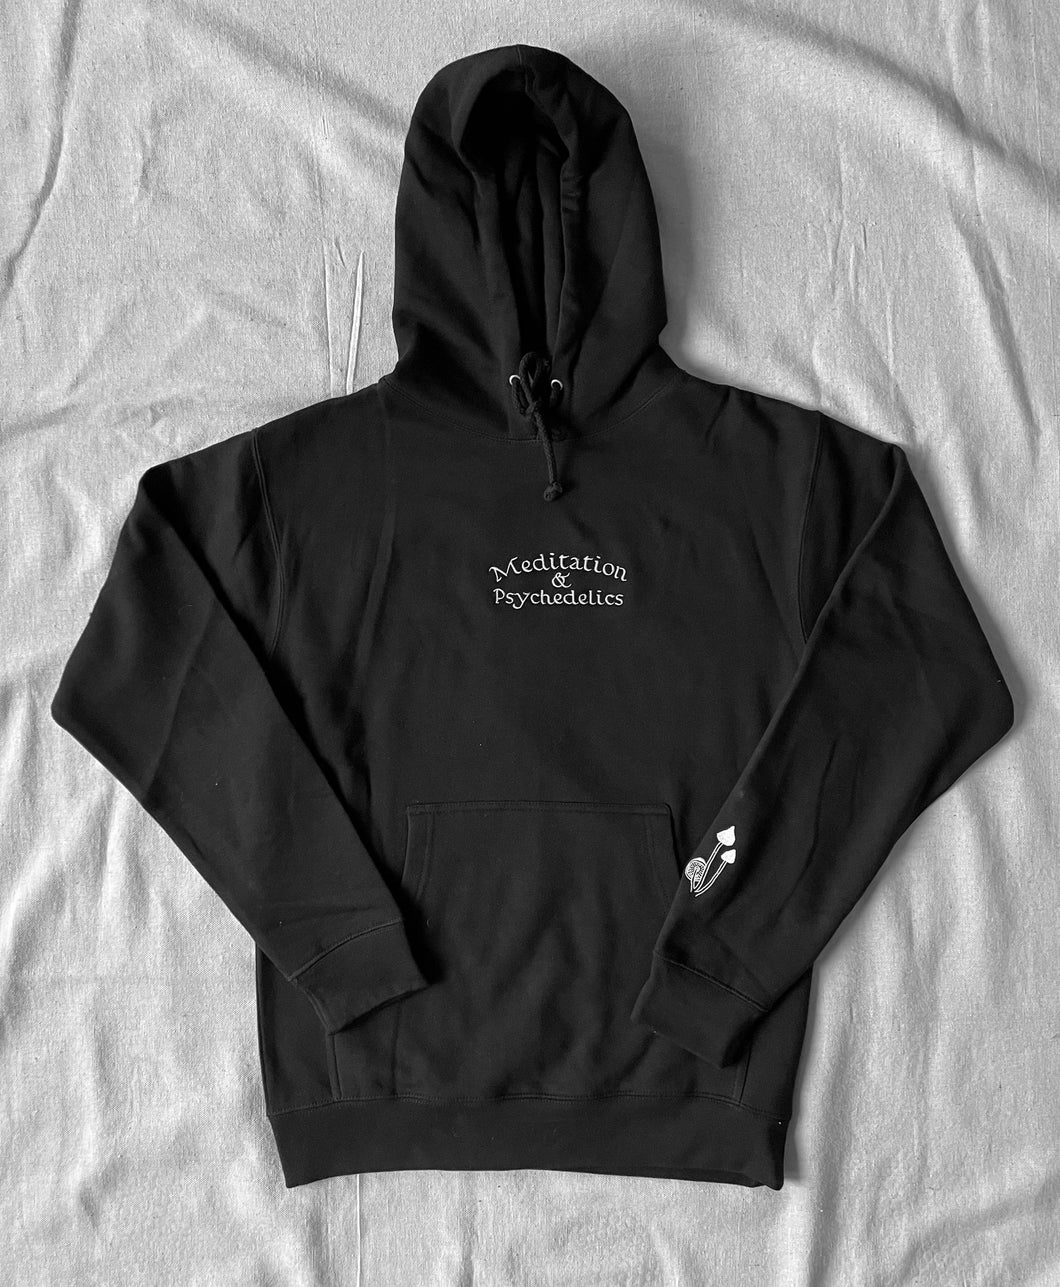 Meditation and Psychedelics Embroidered Heavyweight Hoodie Sweatshirt- 2 colors